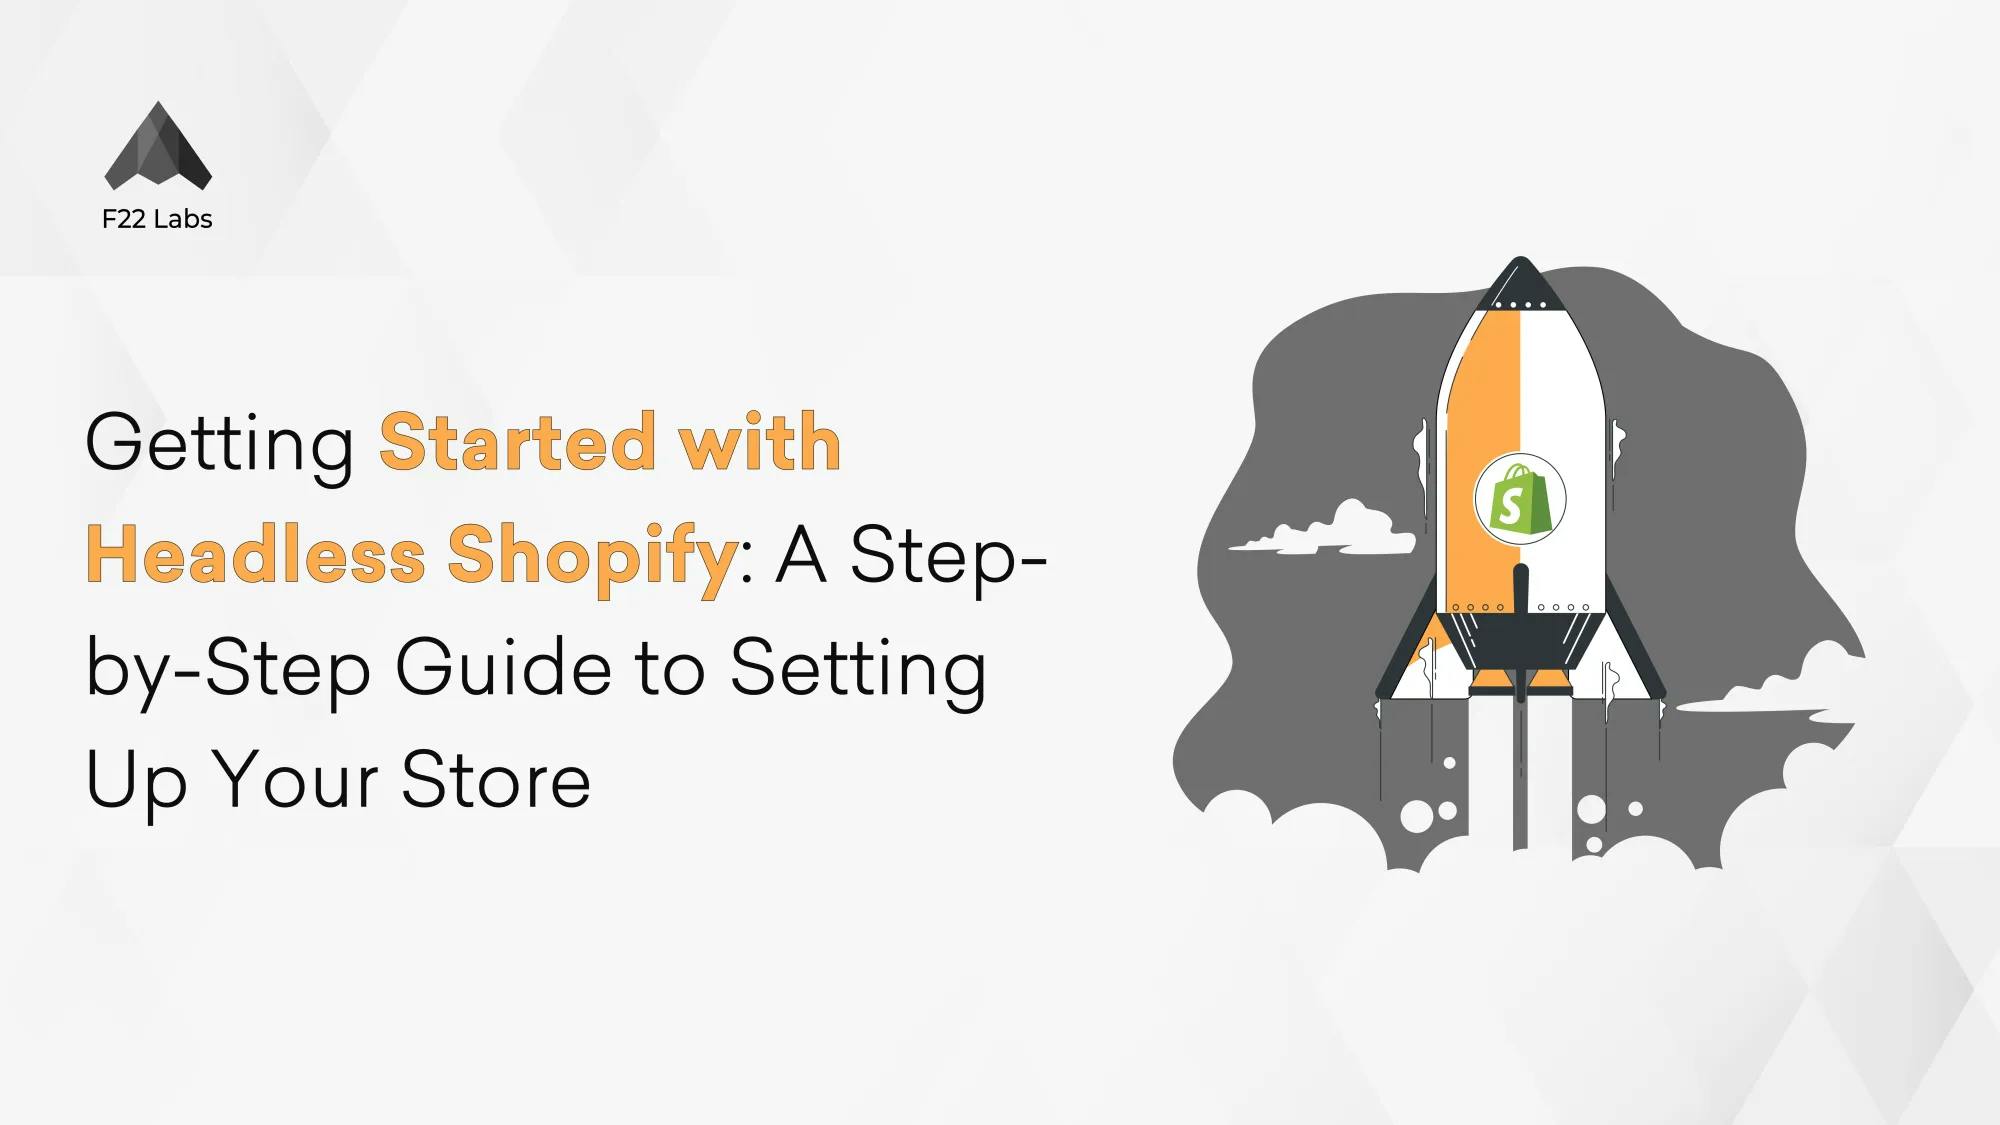 Getting Started with Headless Shopify: Step-by-Step Guide to Setting Up Your Store Hero